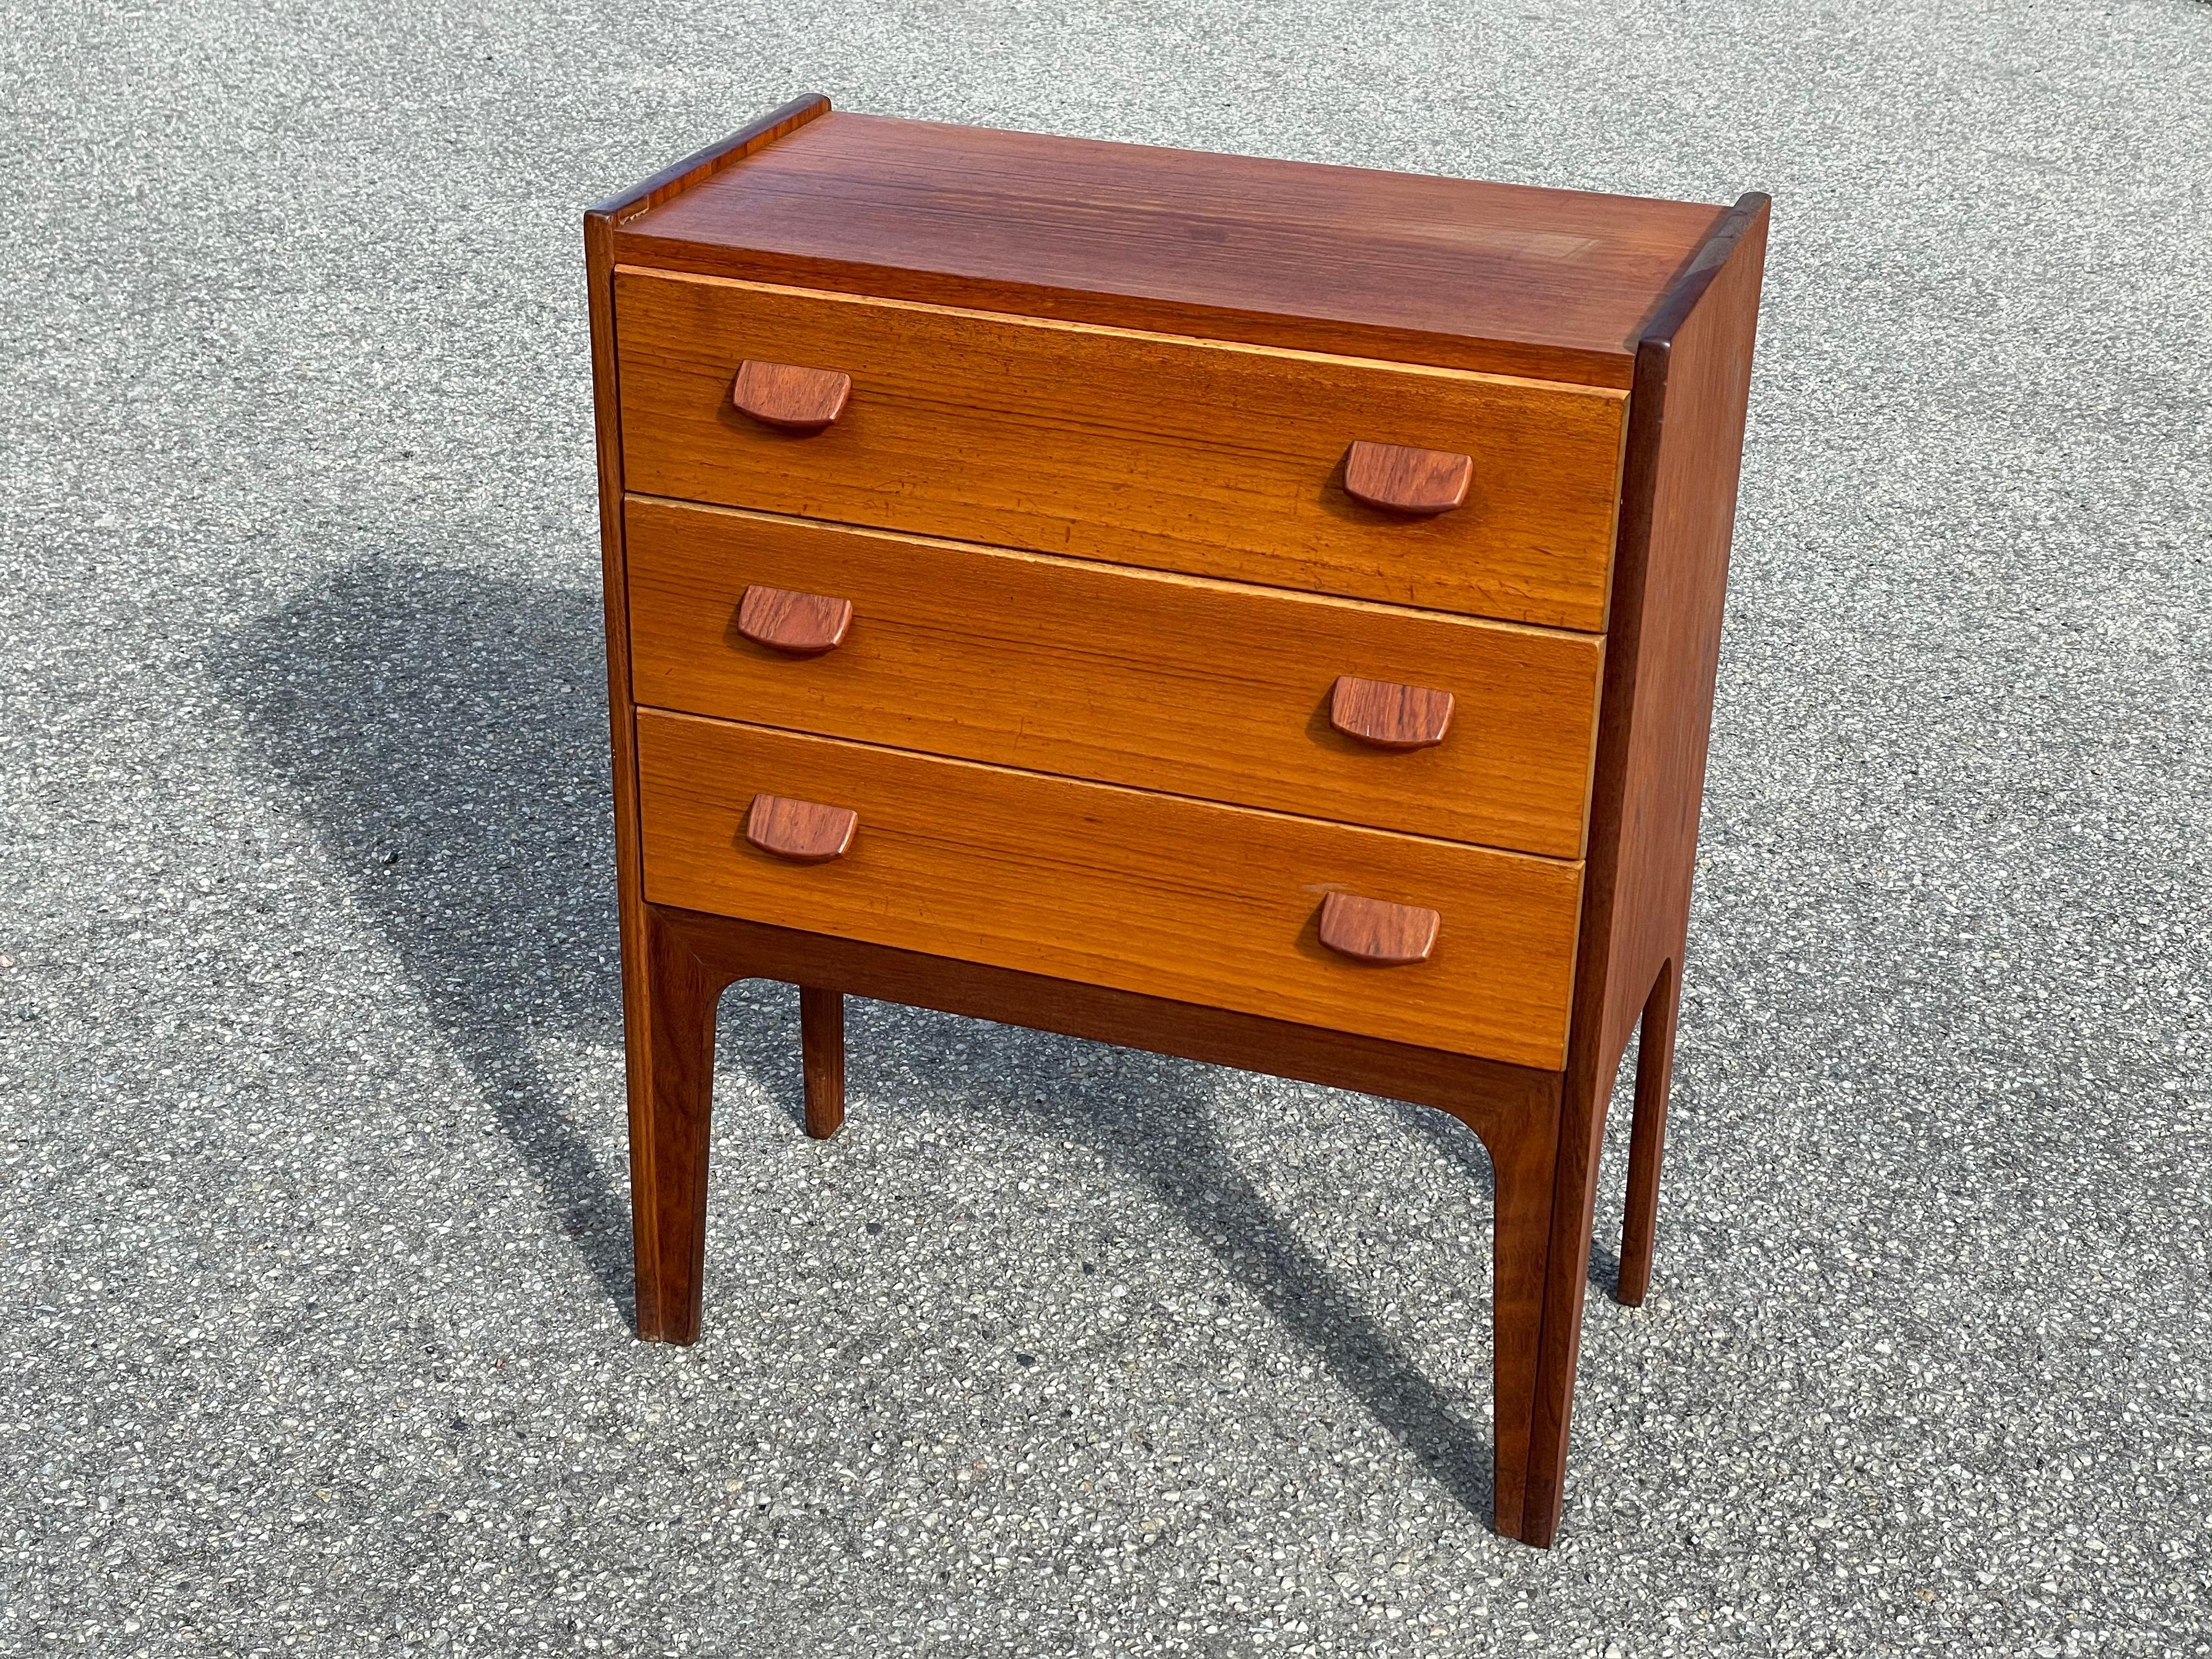 A teak dresser with beautiful lines, in excellent vintage condition.